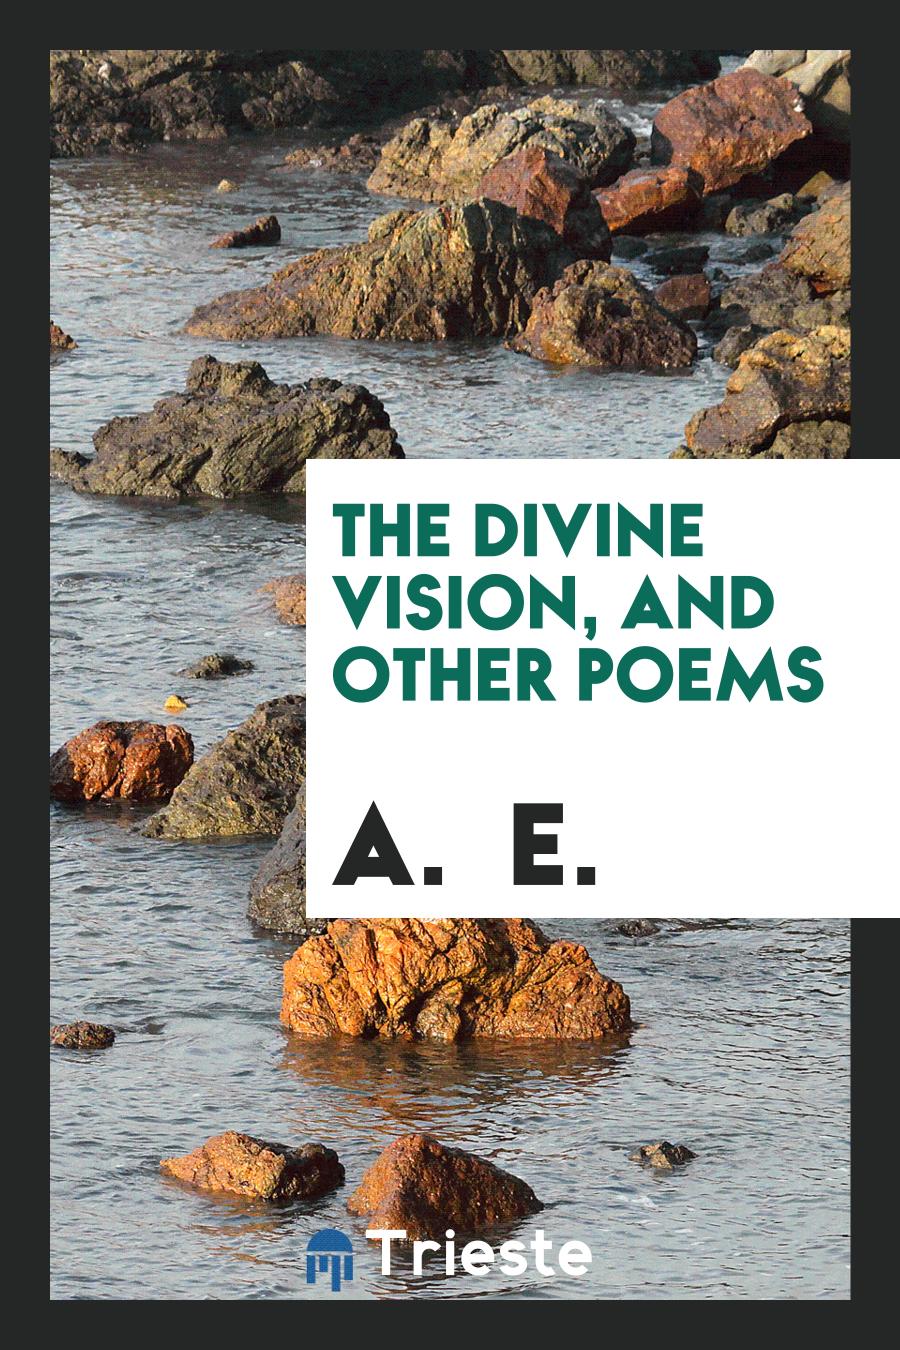 The Divine Vision, and Other Poems